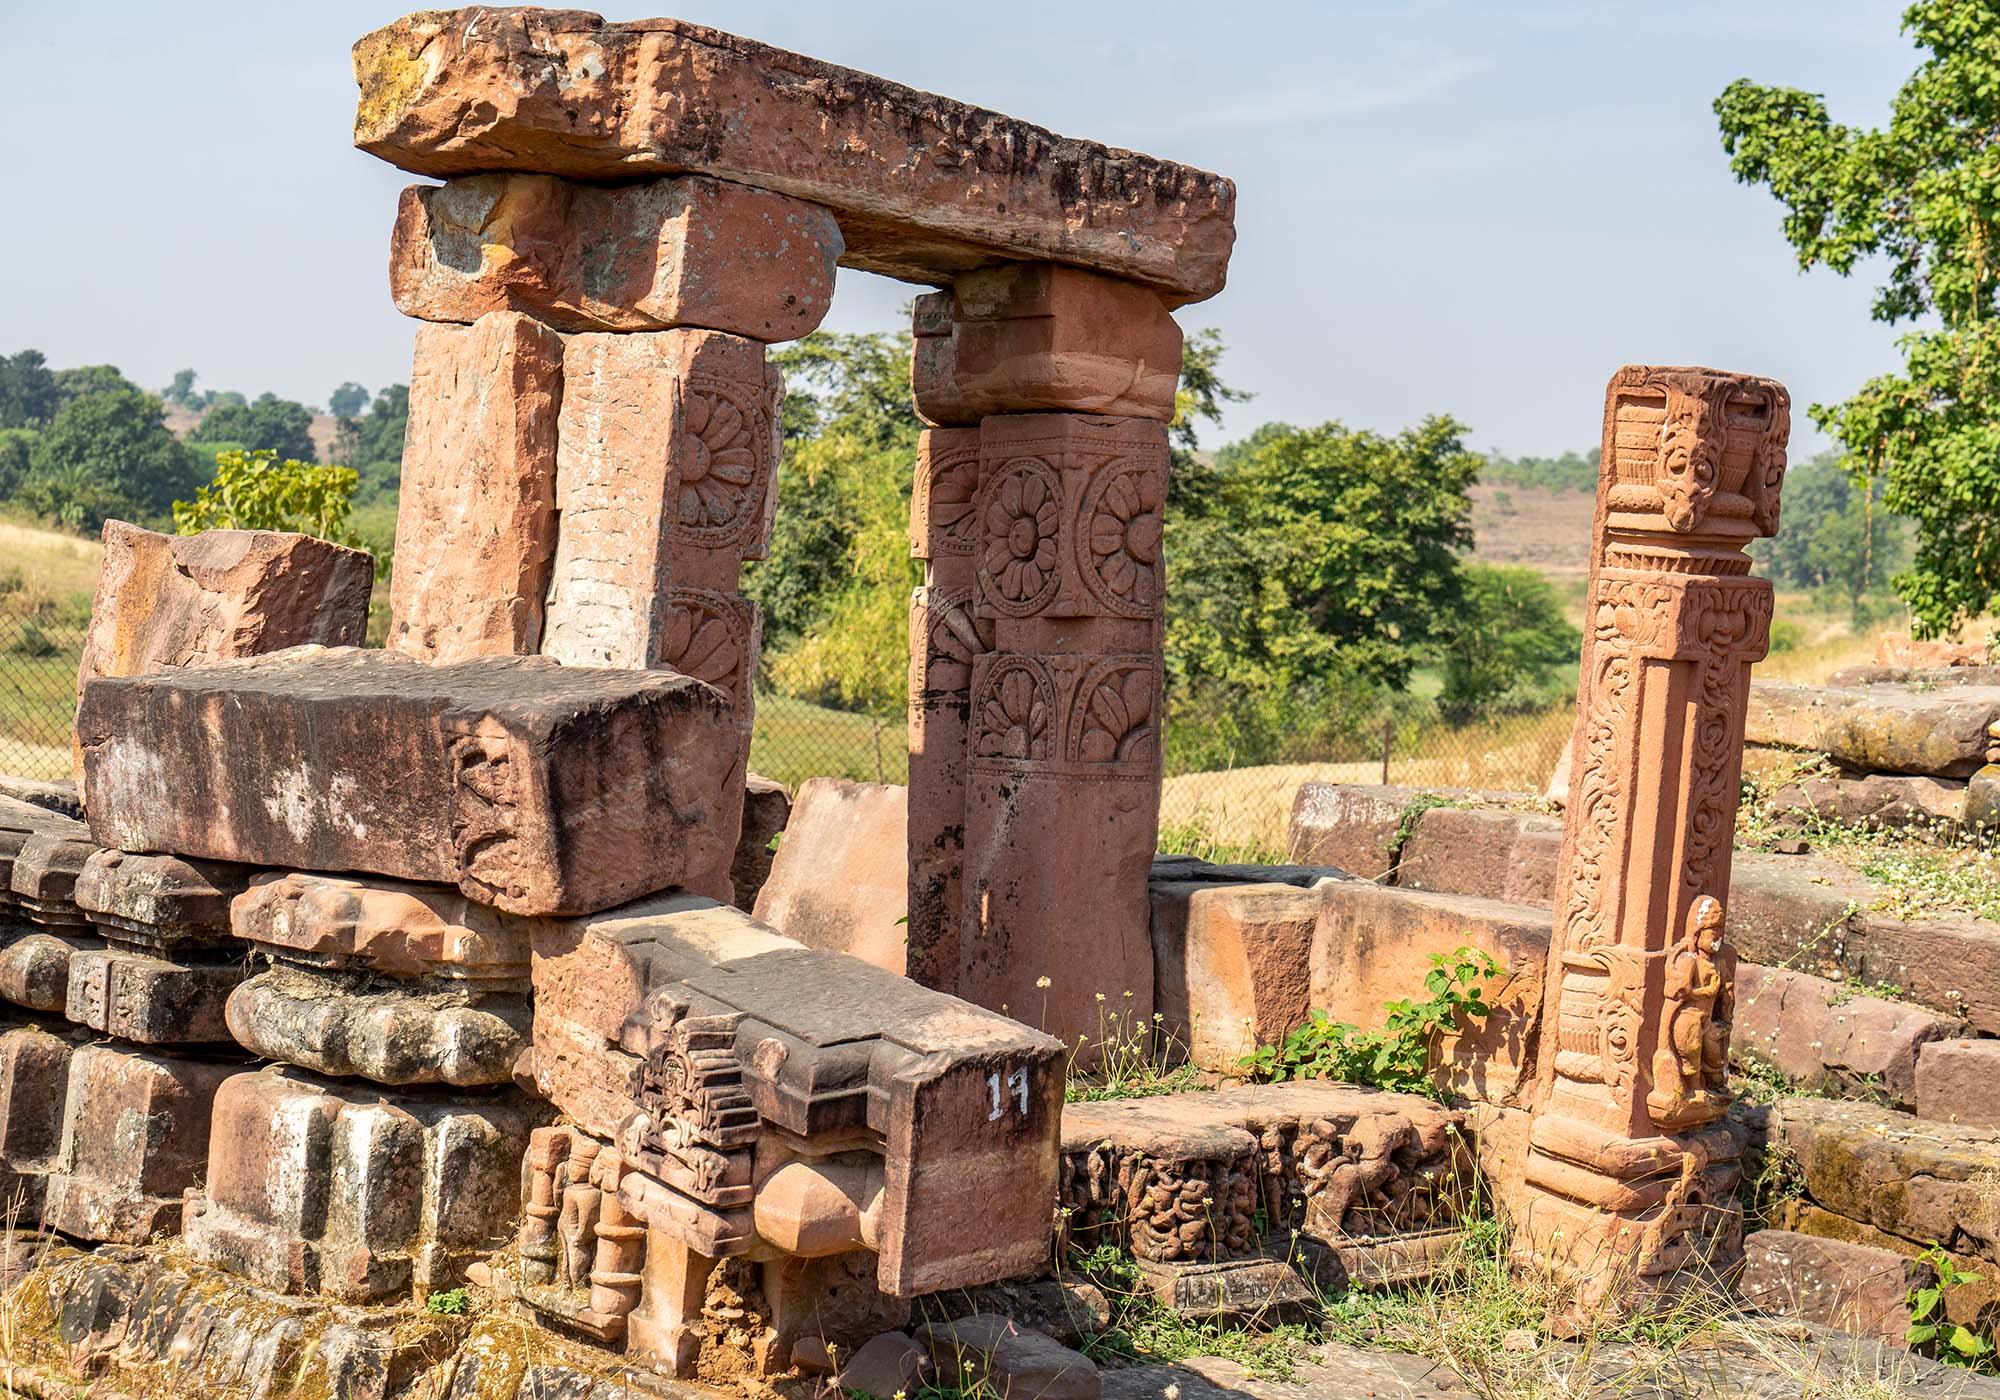 One of the temple ruins at Ashapuri, which would have been a large temple complex between the 9th and 11th centuries. – © Michael Turtle